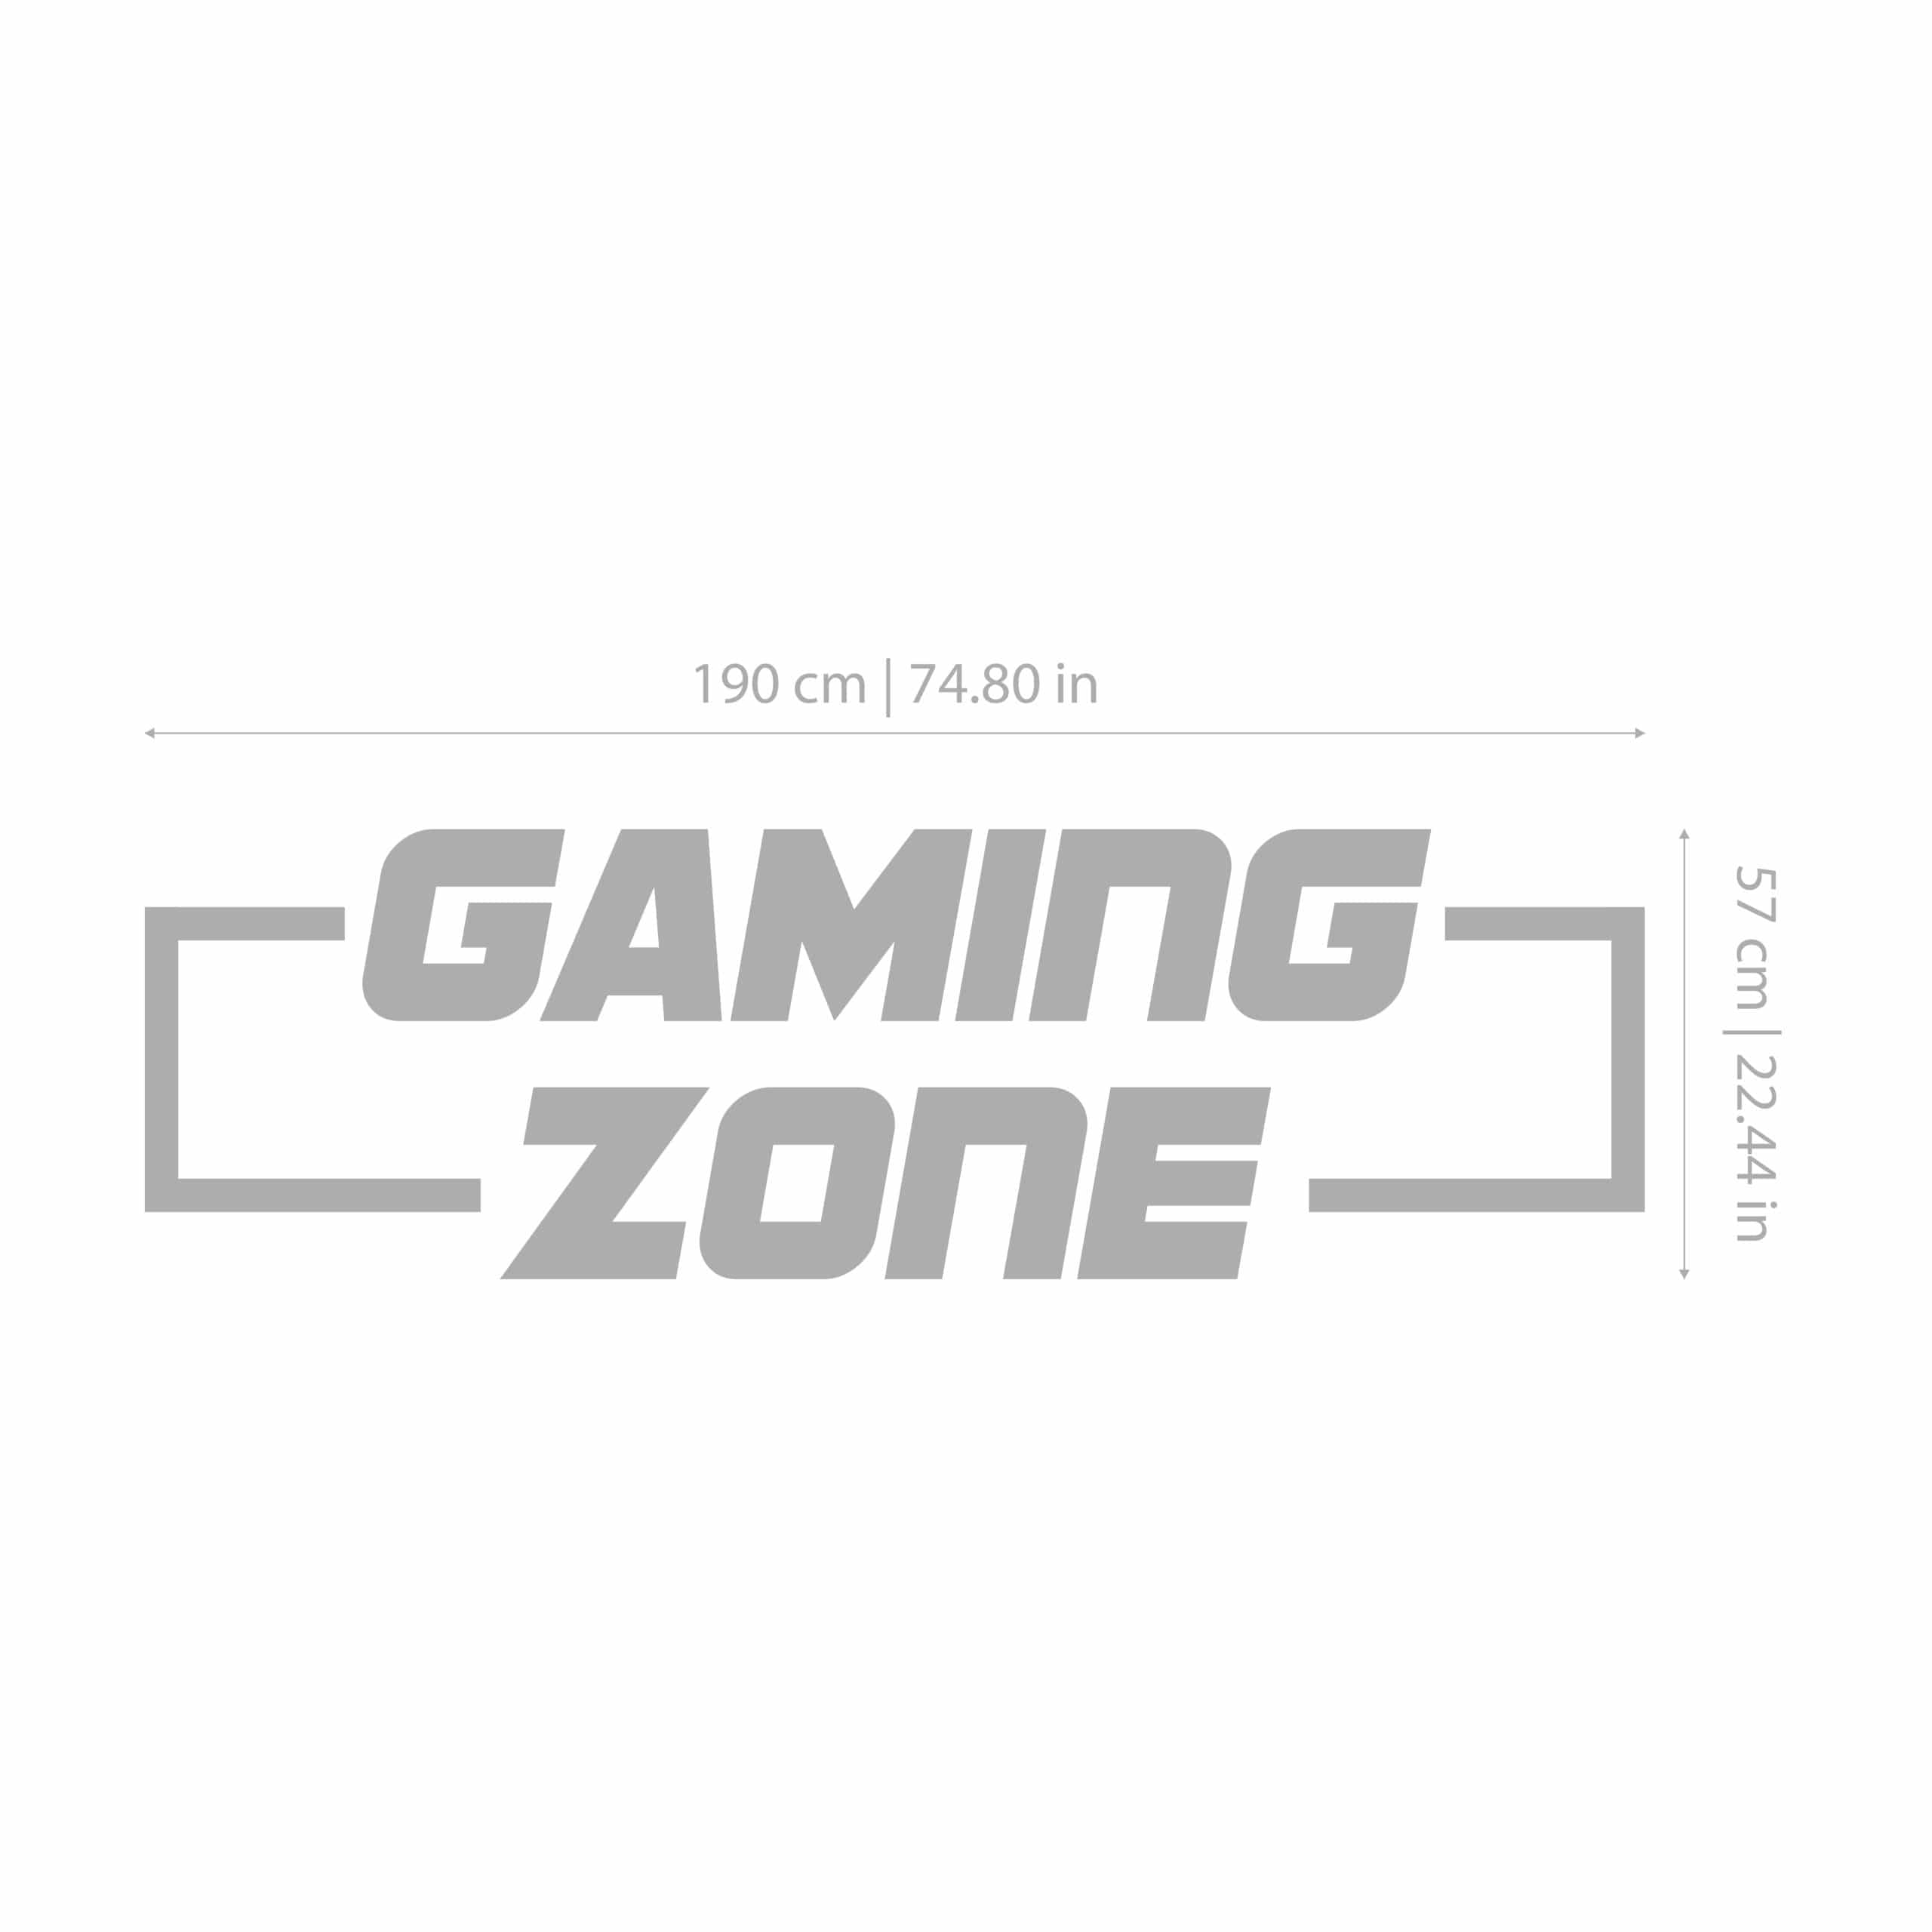 Gaming Zone 3D Sign